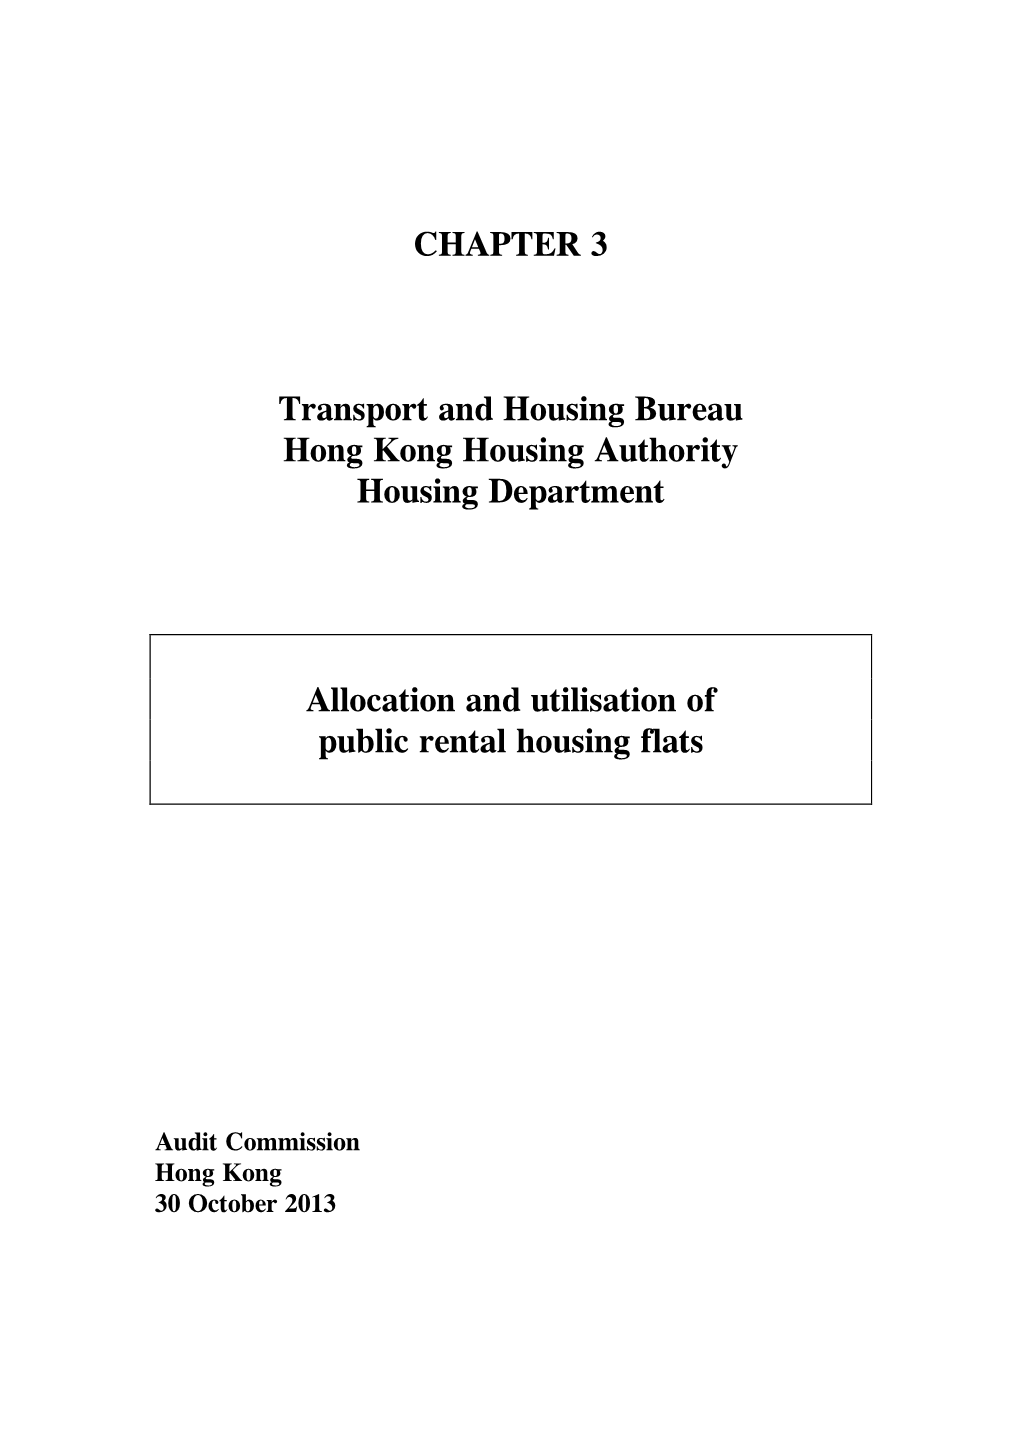 CHAPTER 3 Transport and Housing Bureau Hong Kong Housing Authority Housing Department Allocation and Utilisation of Public Renta